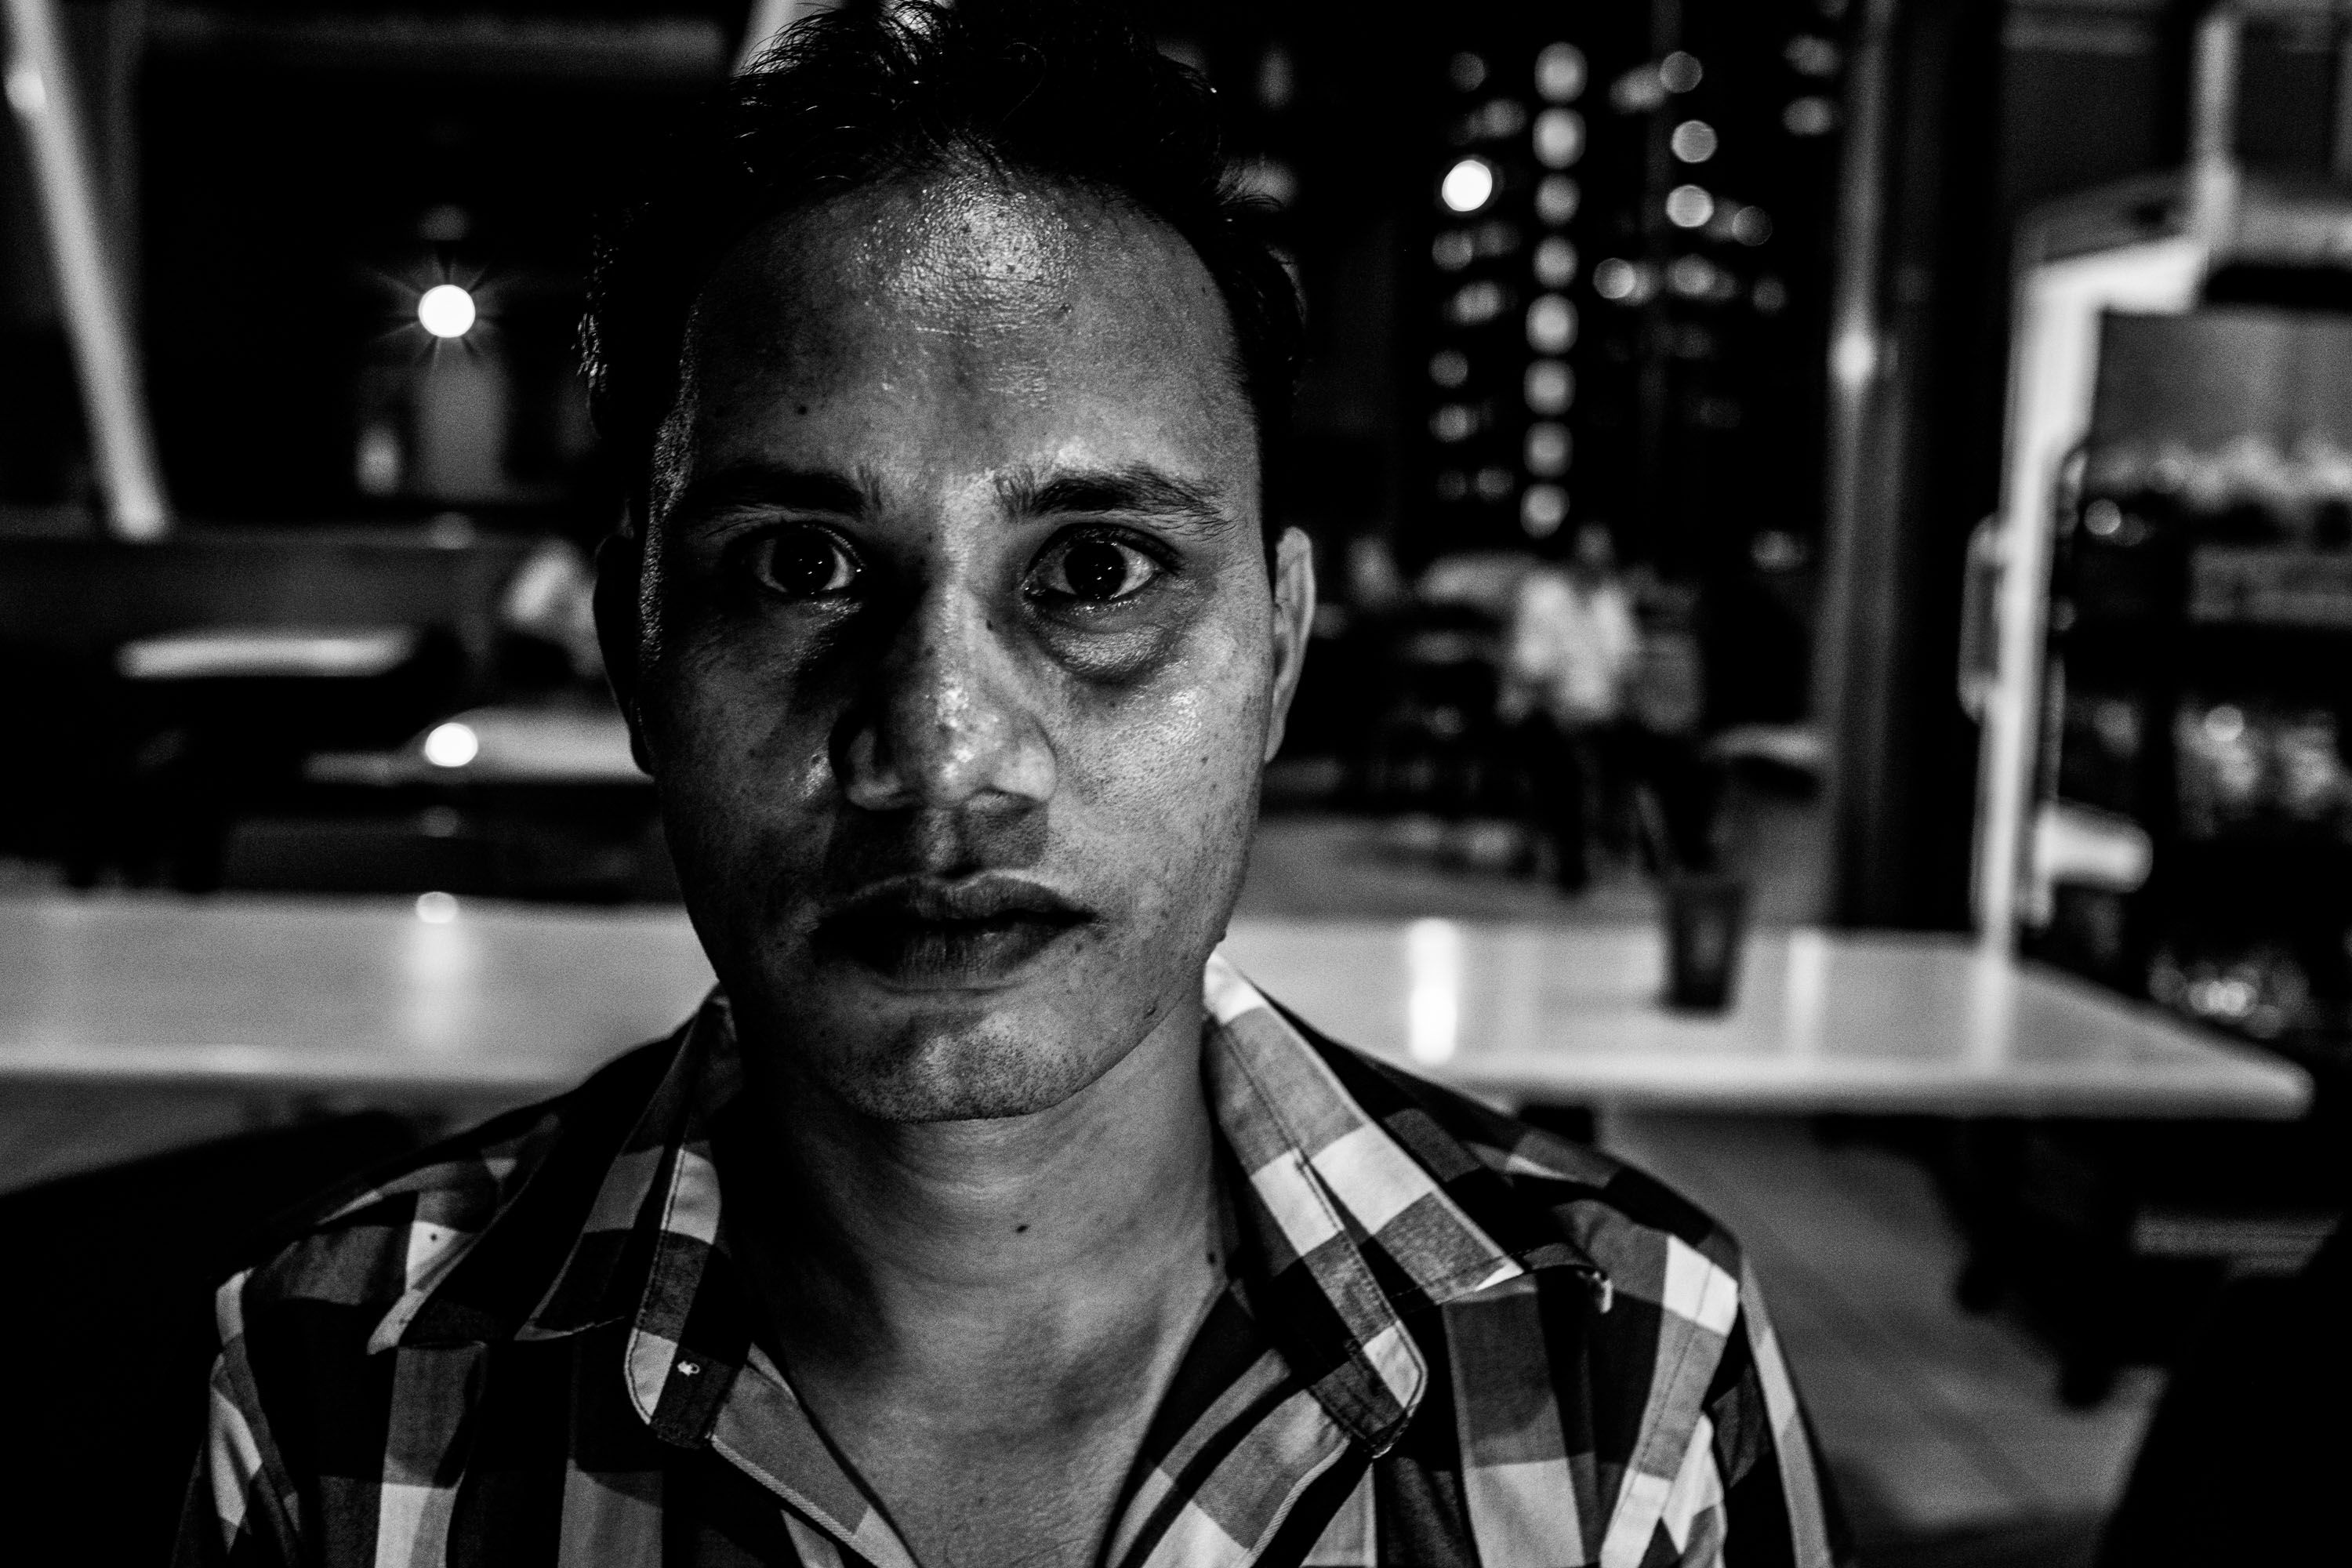 Sohag Faslul Haque, a construction worker from Bangladesh, injured his back while working. After he had a check up with a doctor, his employer sent him back without compensation. He has filed for work injury compensation, but has been out of work for months. Image by Xyza Bacani. Singapore, 2016.